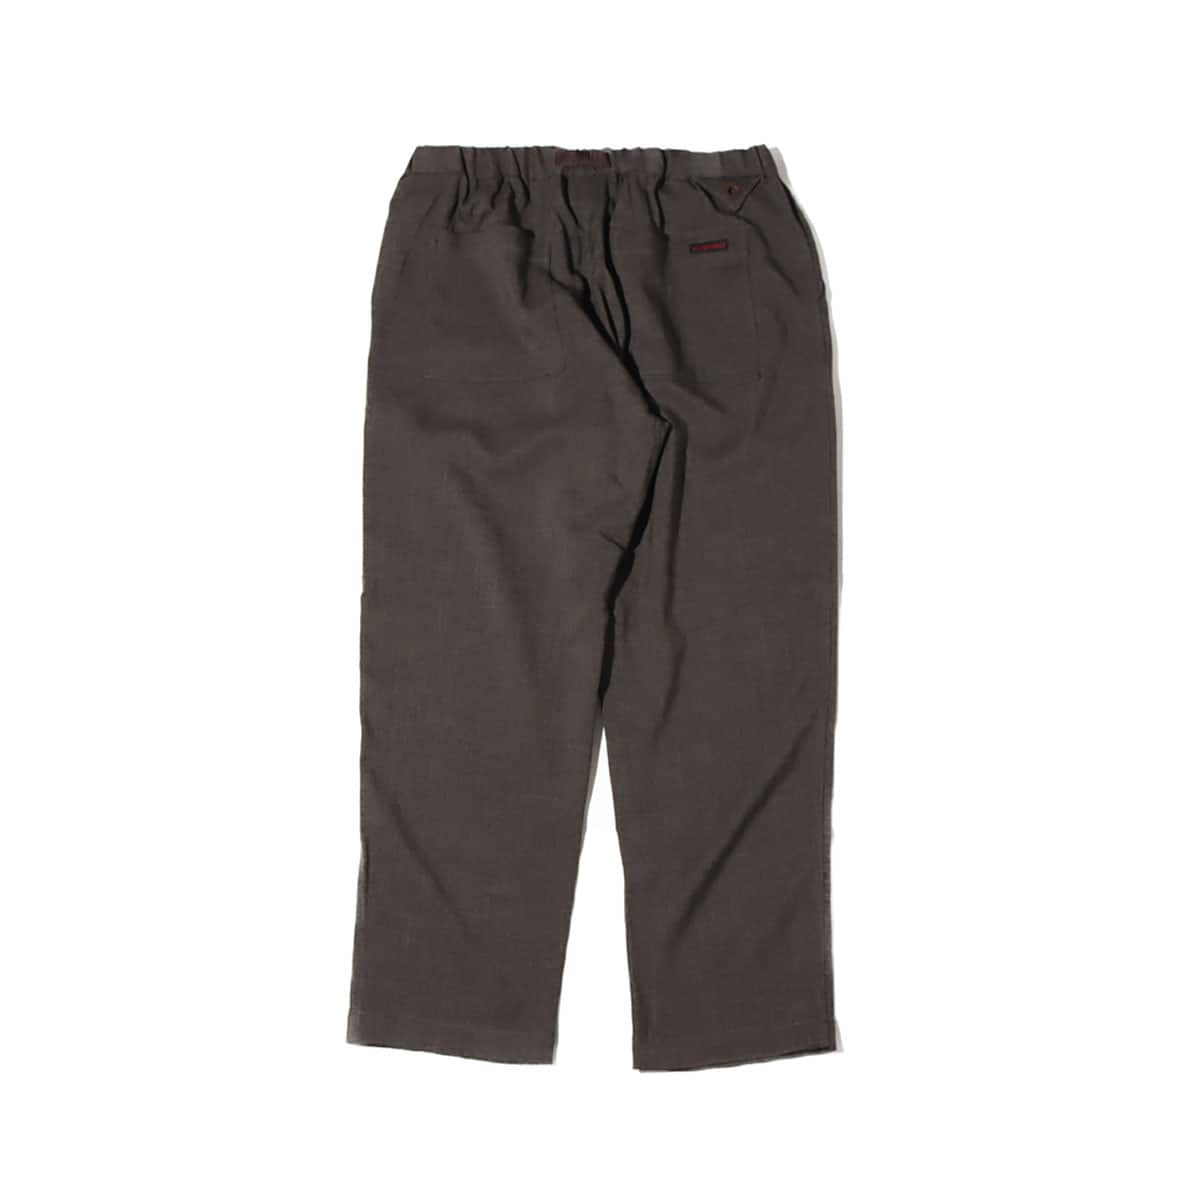 WHITE MOUNTAINEERING x GRAMICCI TAPERED PANTS BROWN